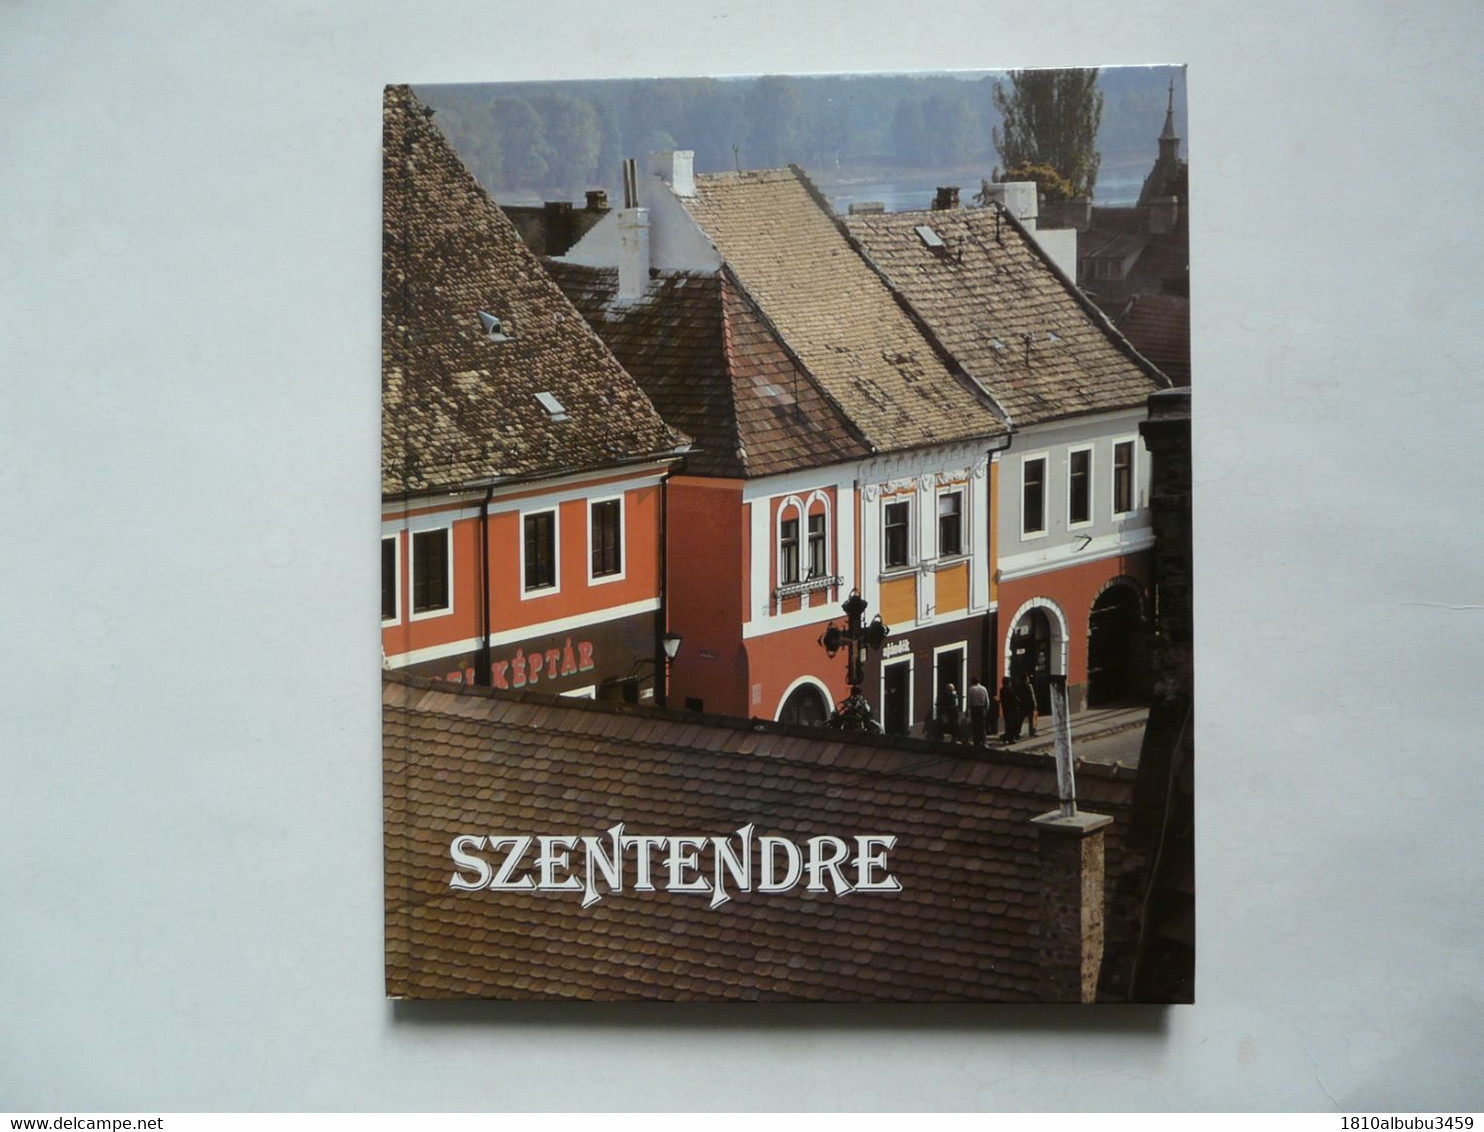 SZENTENDRE With 101 Colour Photographs By Gyula TAHIN - Cultura